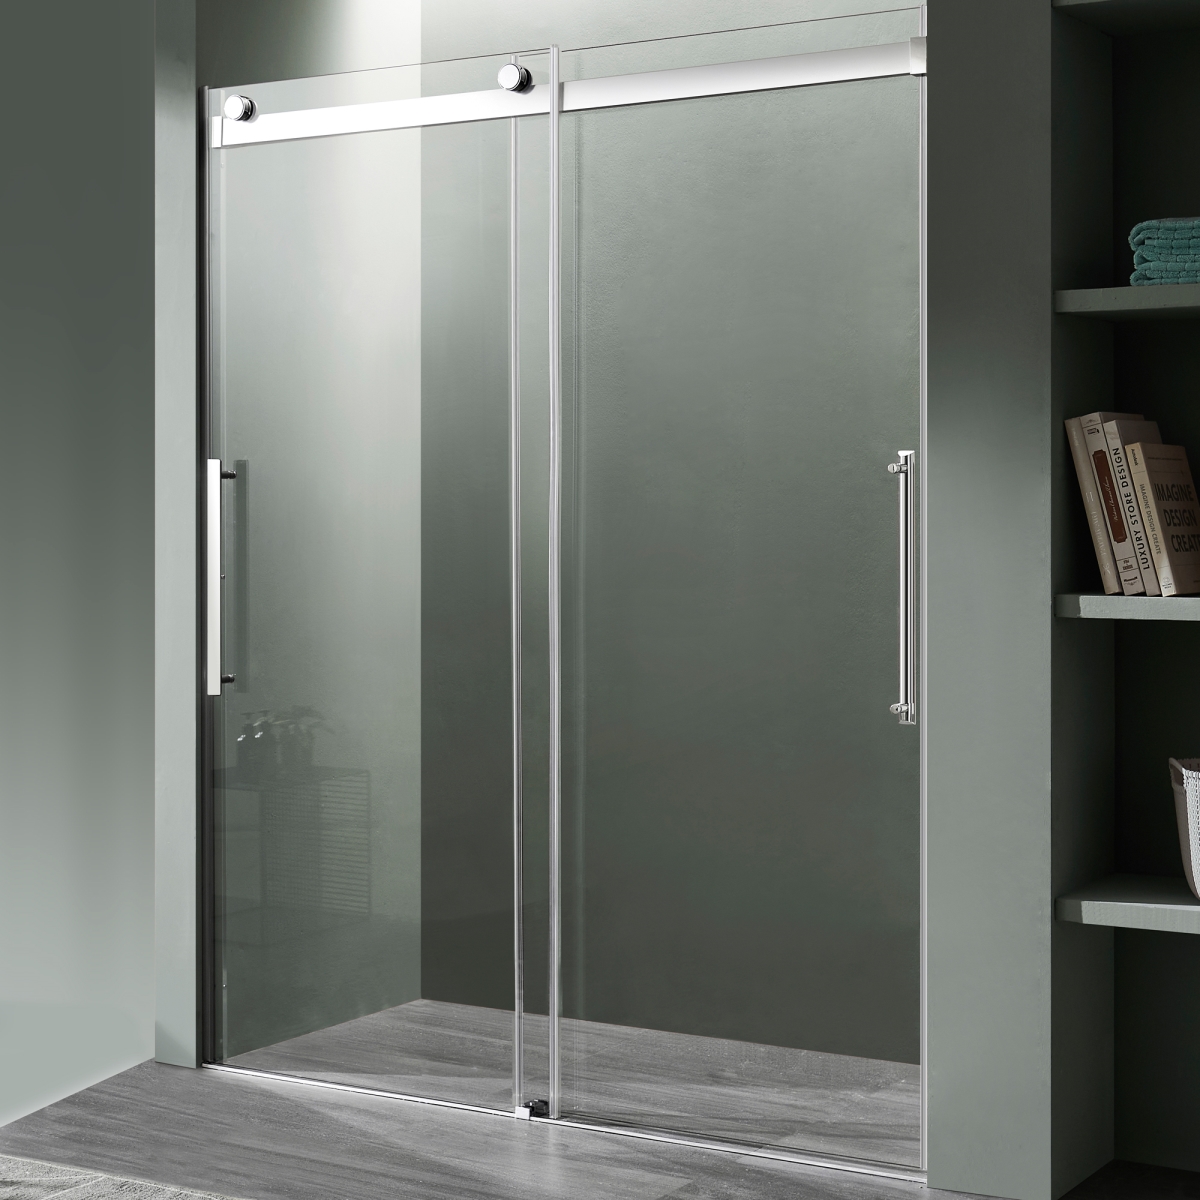 Picture of Anzzi SD-FRLS05902CH 60 x 76 in. Stellar Series Frameless Sliding Shower Door with Handle, Chrome